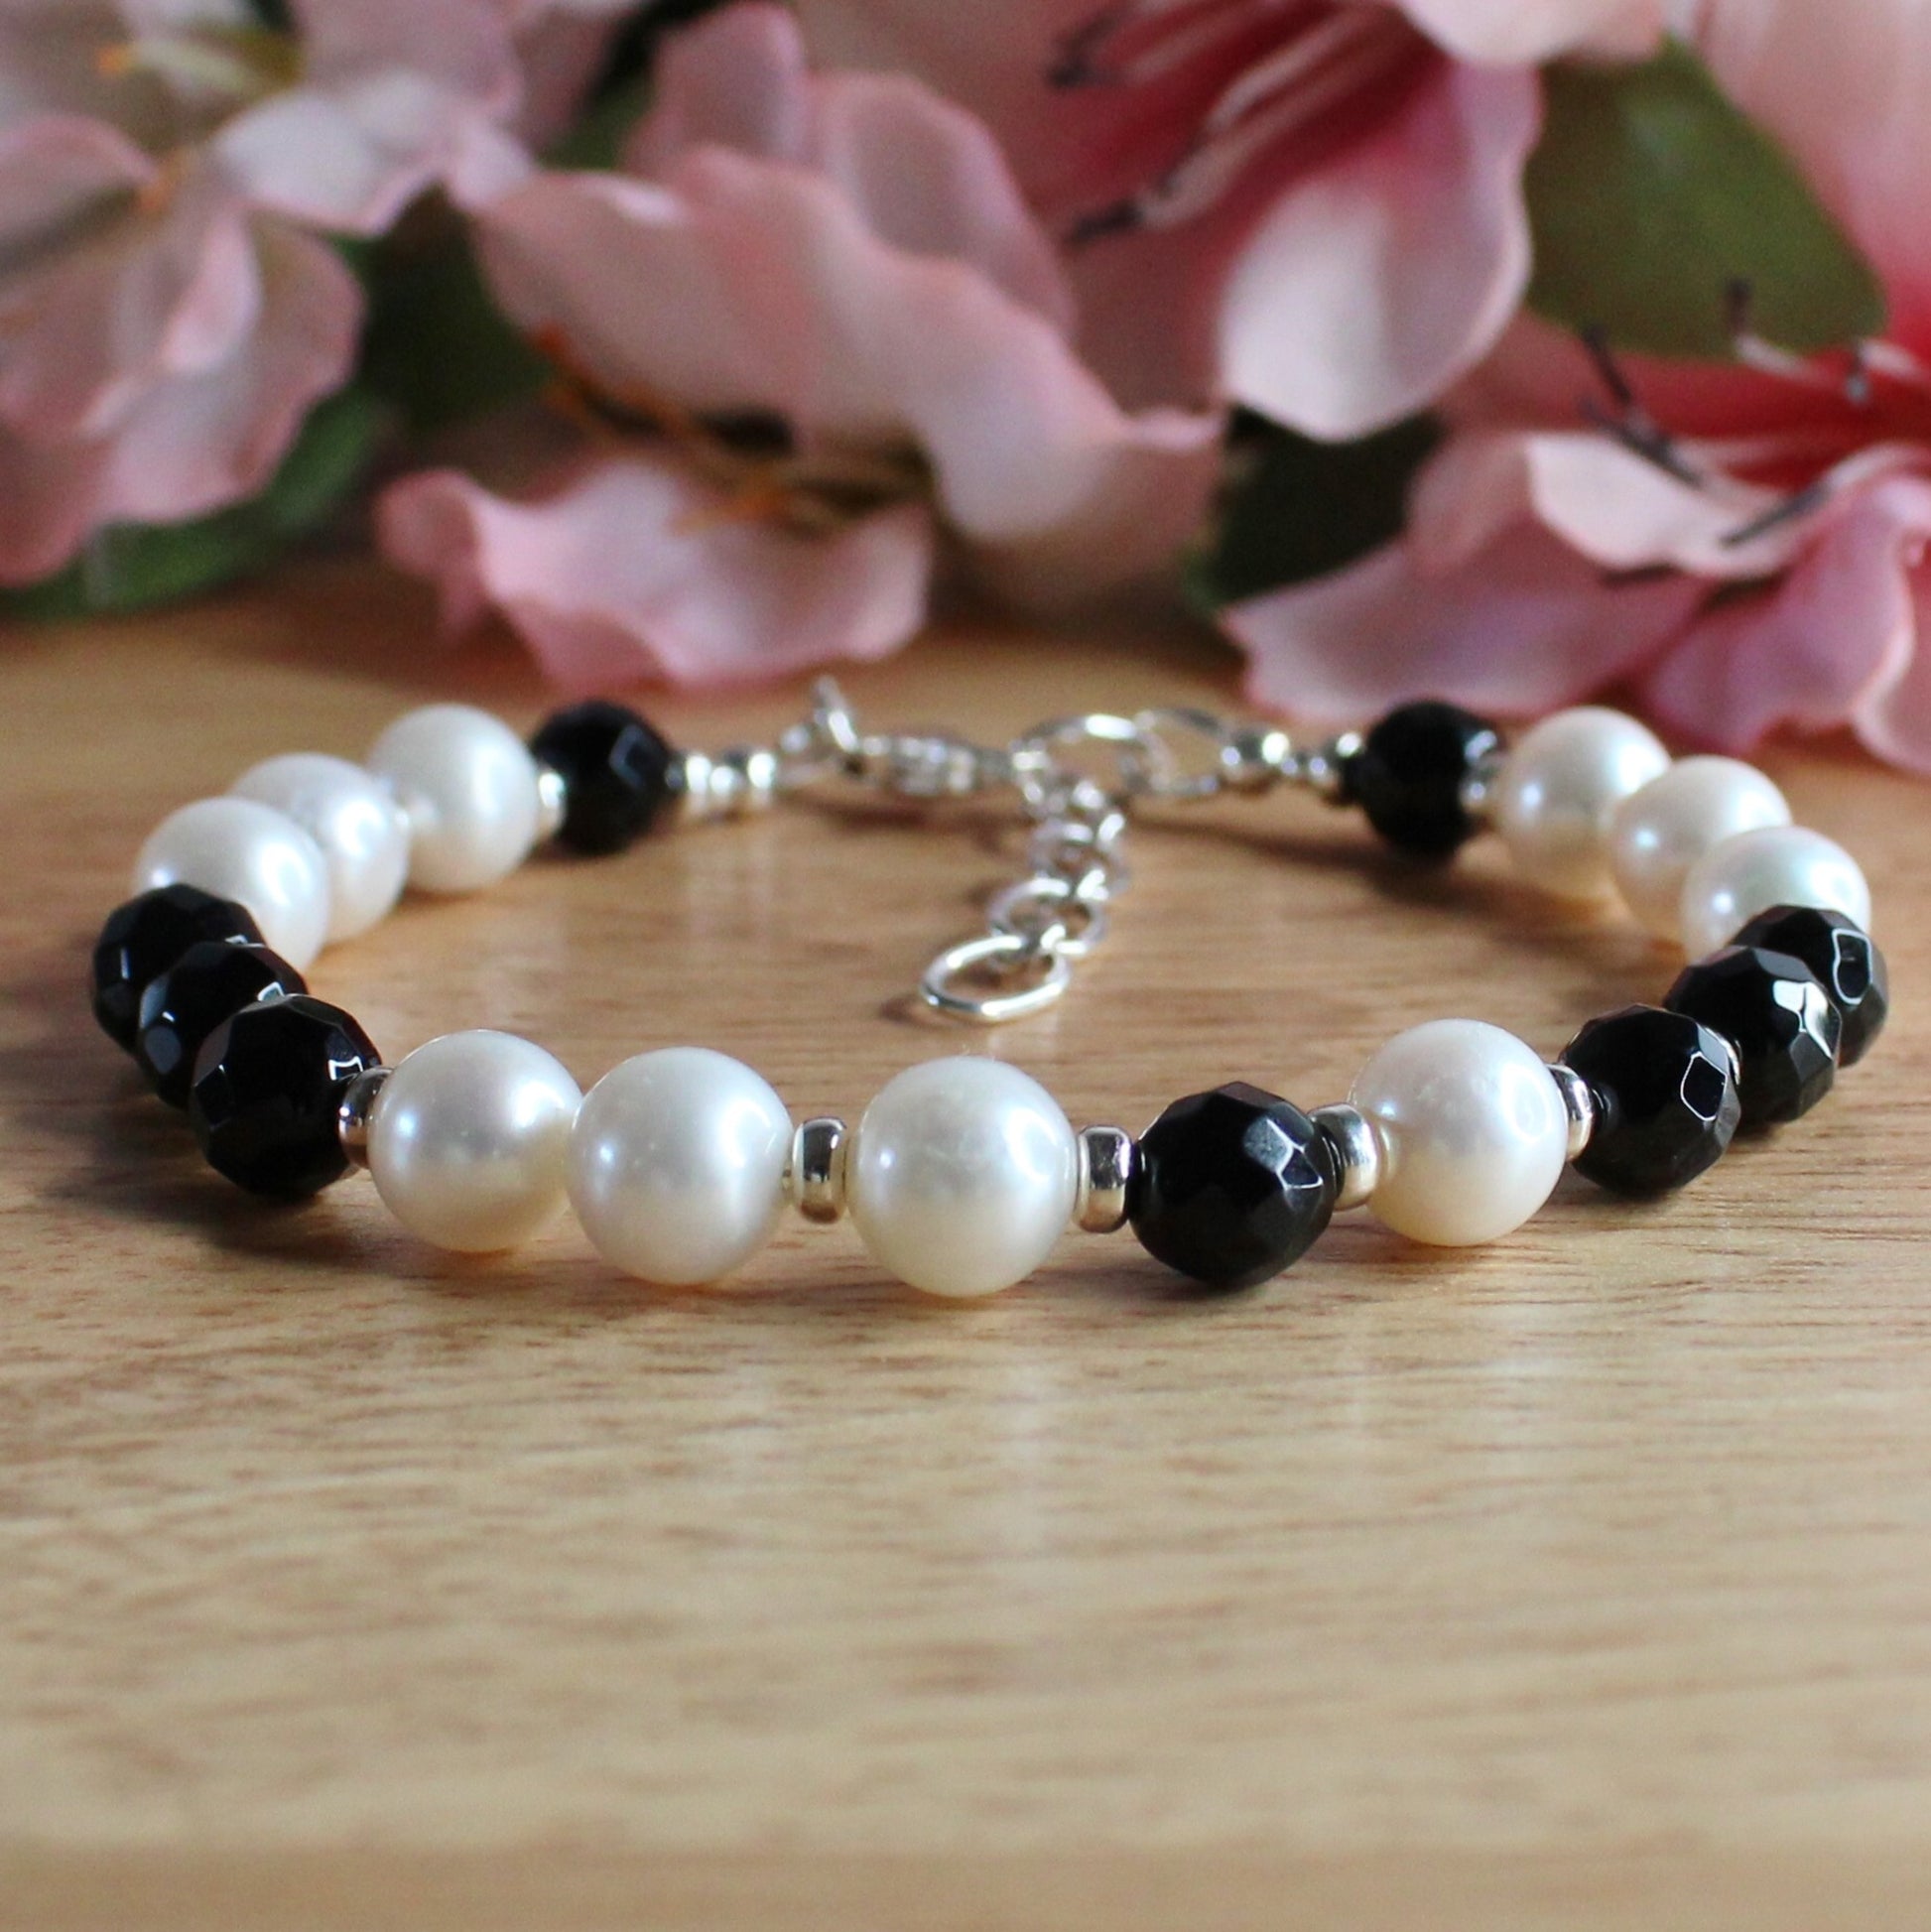 handcrafted black onyx & pearl bracelet. Facetted black onyx beads, white round freshwater pearls, sterling silver accent beads, lobster clasp and extender chain